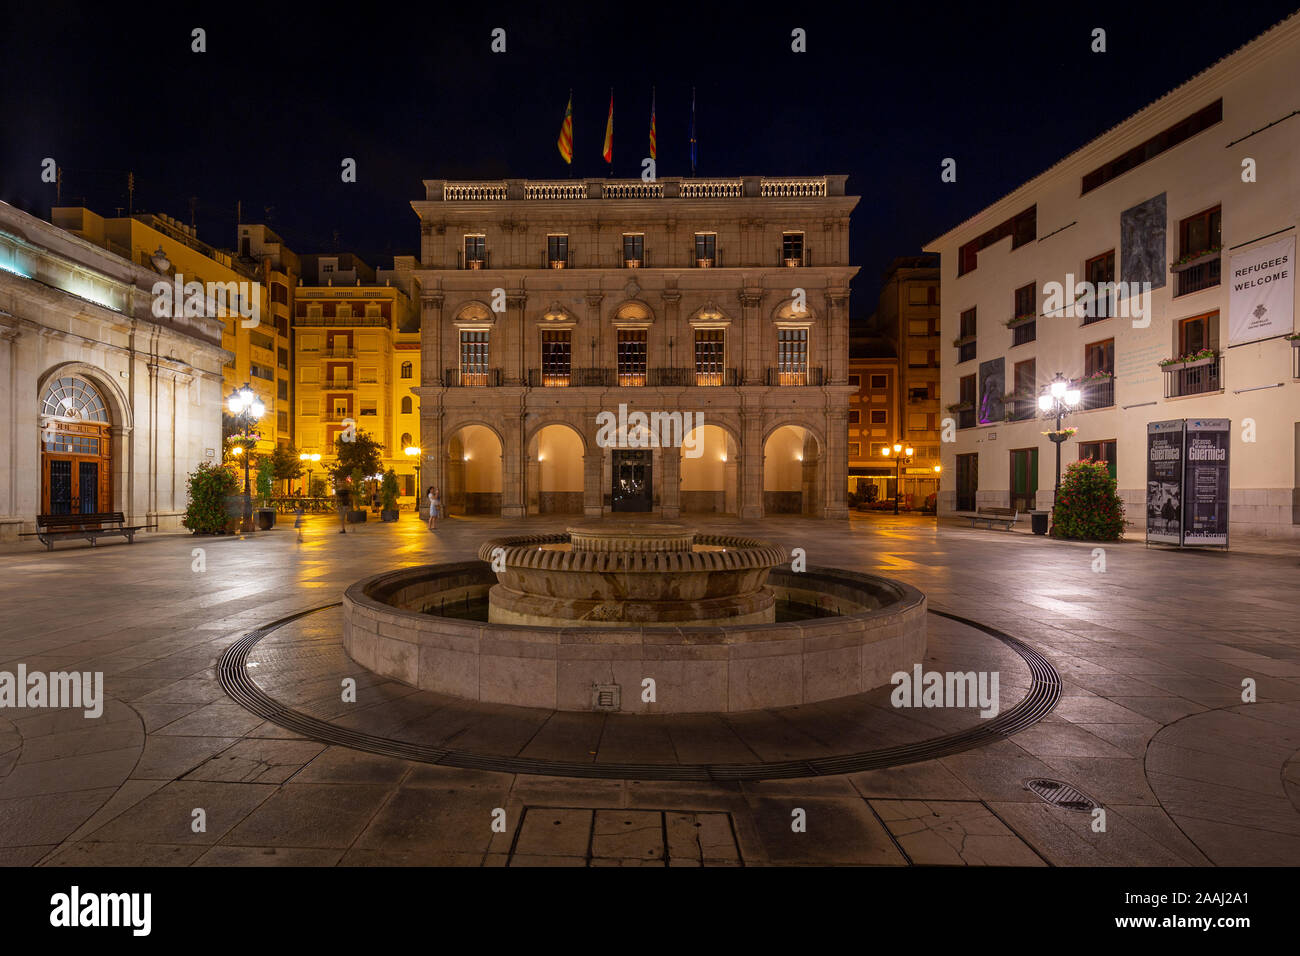 Town Hall in Castellon, Spain in night - 2019.08.10. Building of historic town hall with fountain next to it. Stock Photo